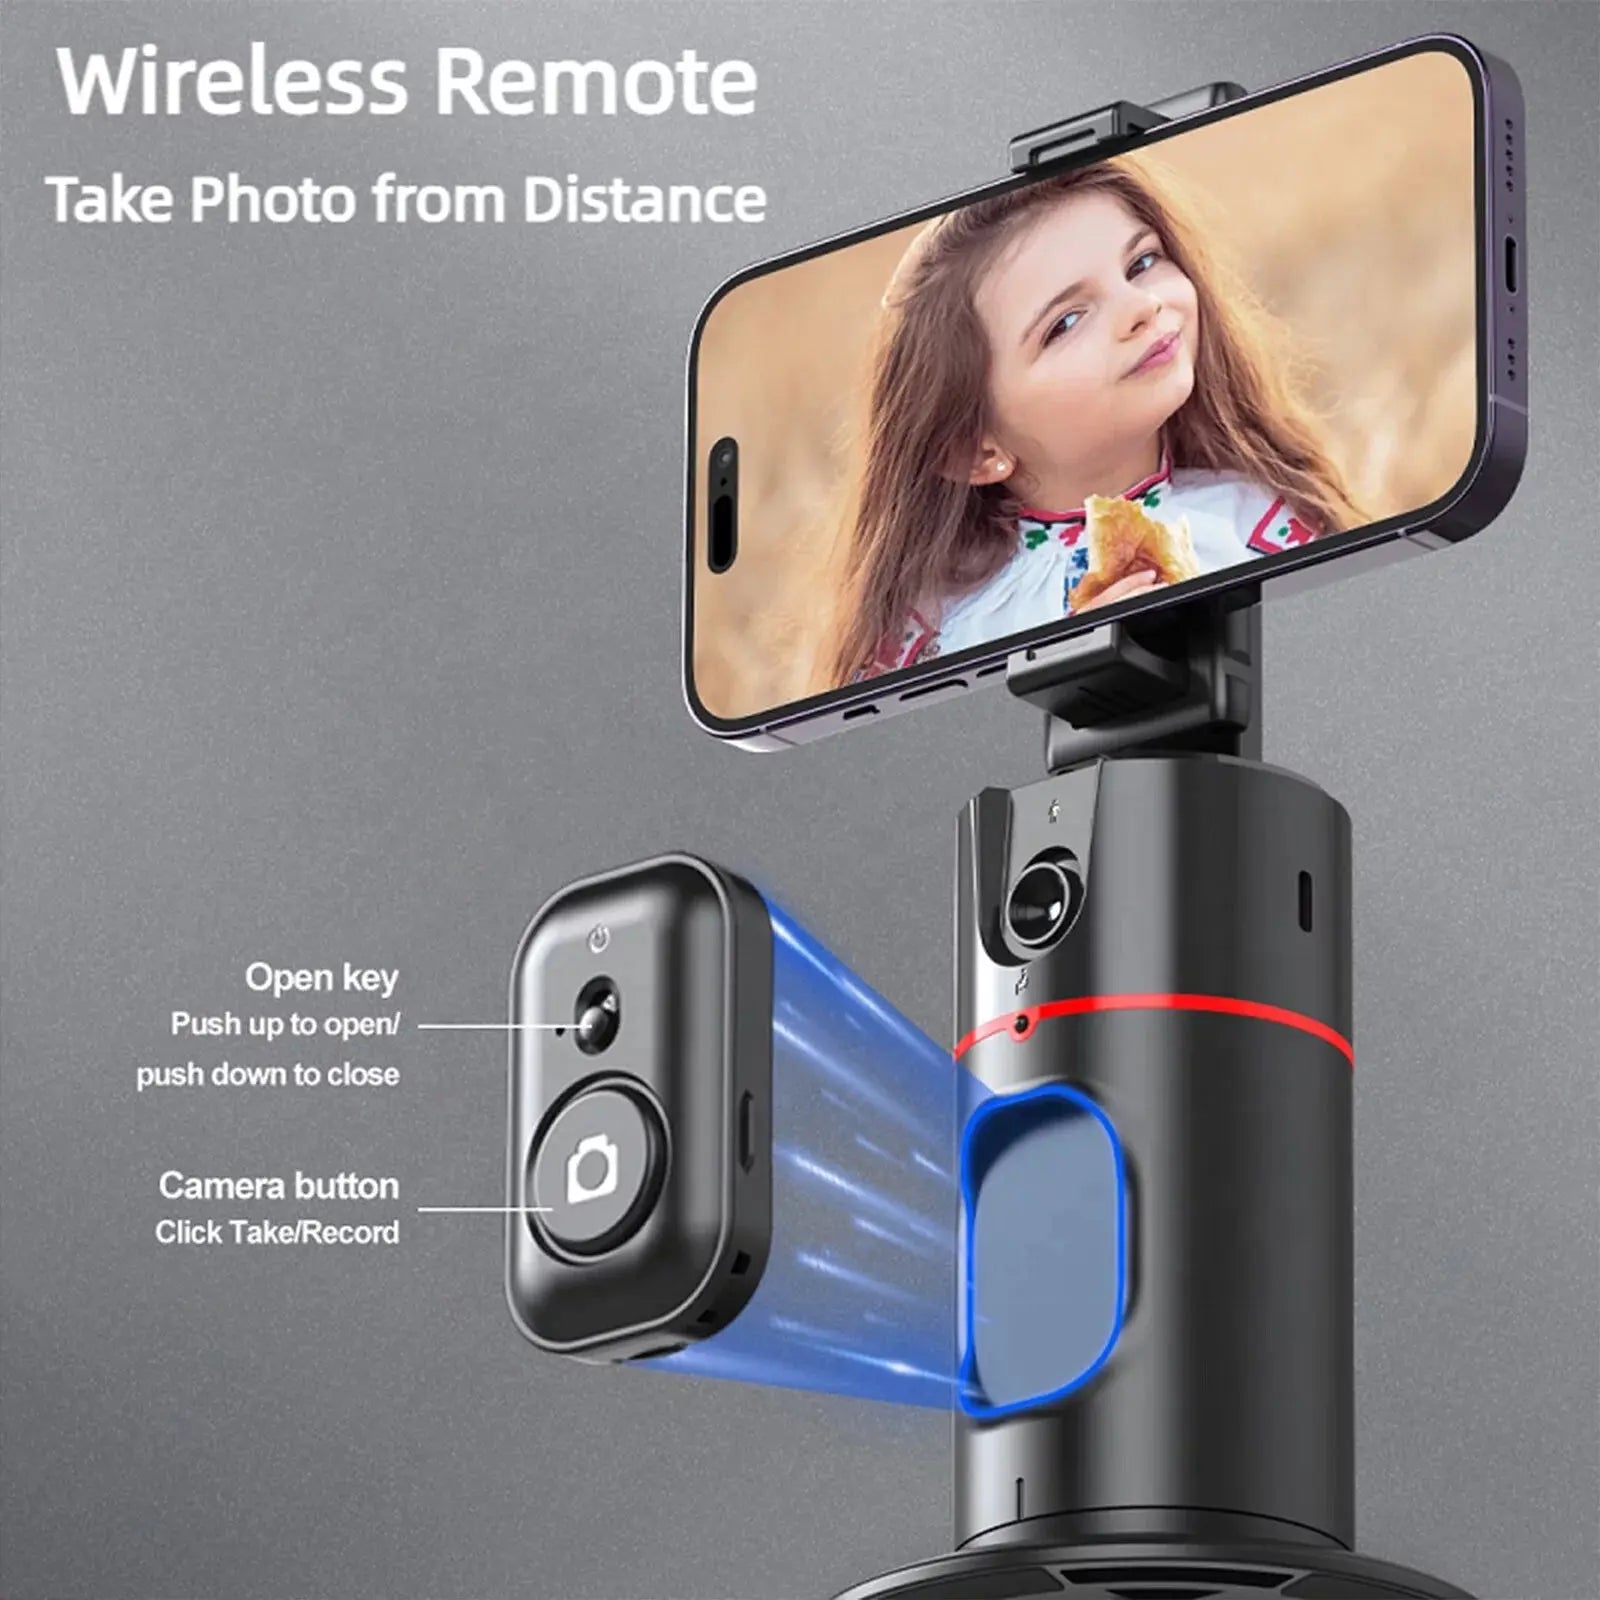 Auto Face Tracking Phone Holder Tripod, No App Required, 360° Rotation Smart Face Body Tracking Tripod Selfie Phone Camera Mount Cell Phone Stand for TIK Tok, Vlog, Live Streaming, Youtube Video - Mary’s TT Shop